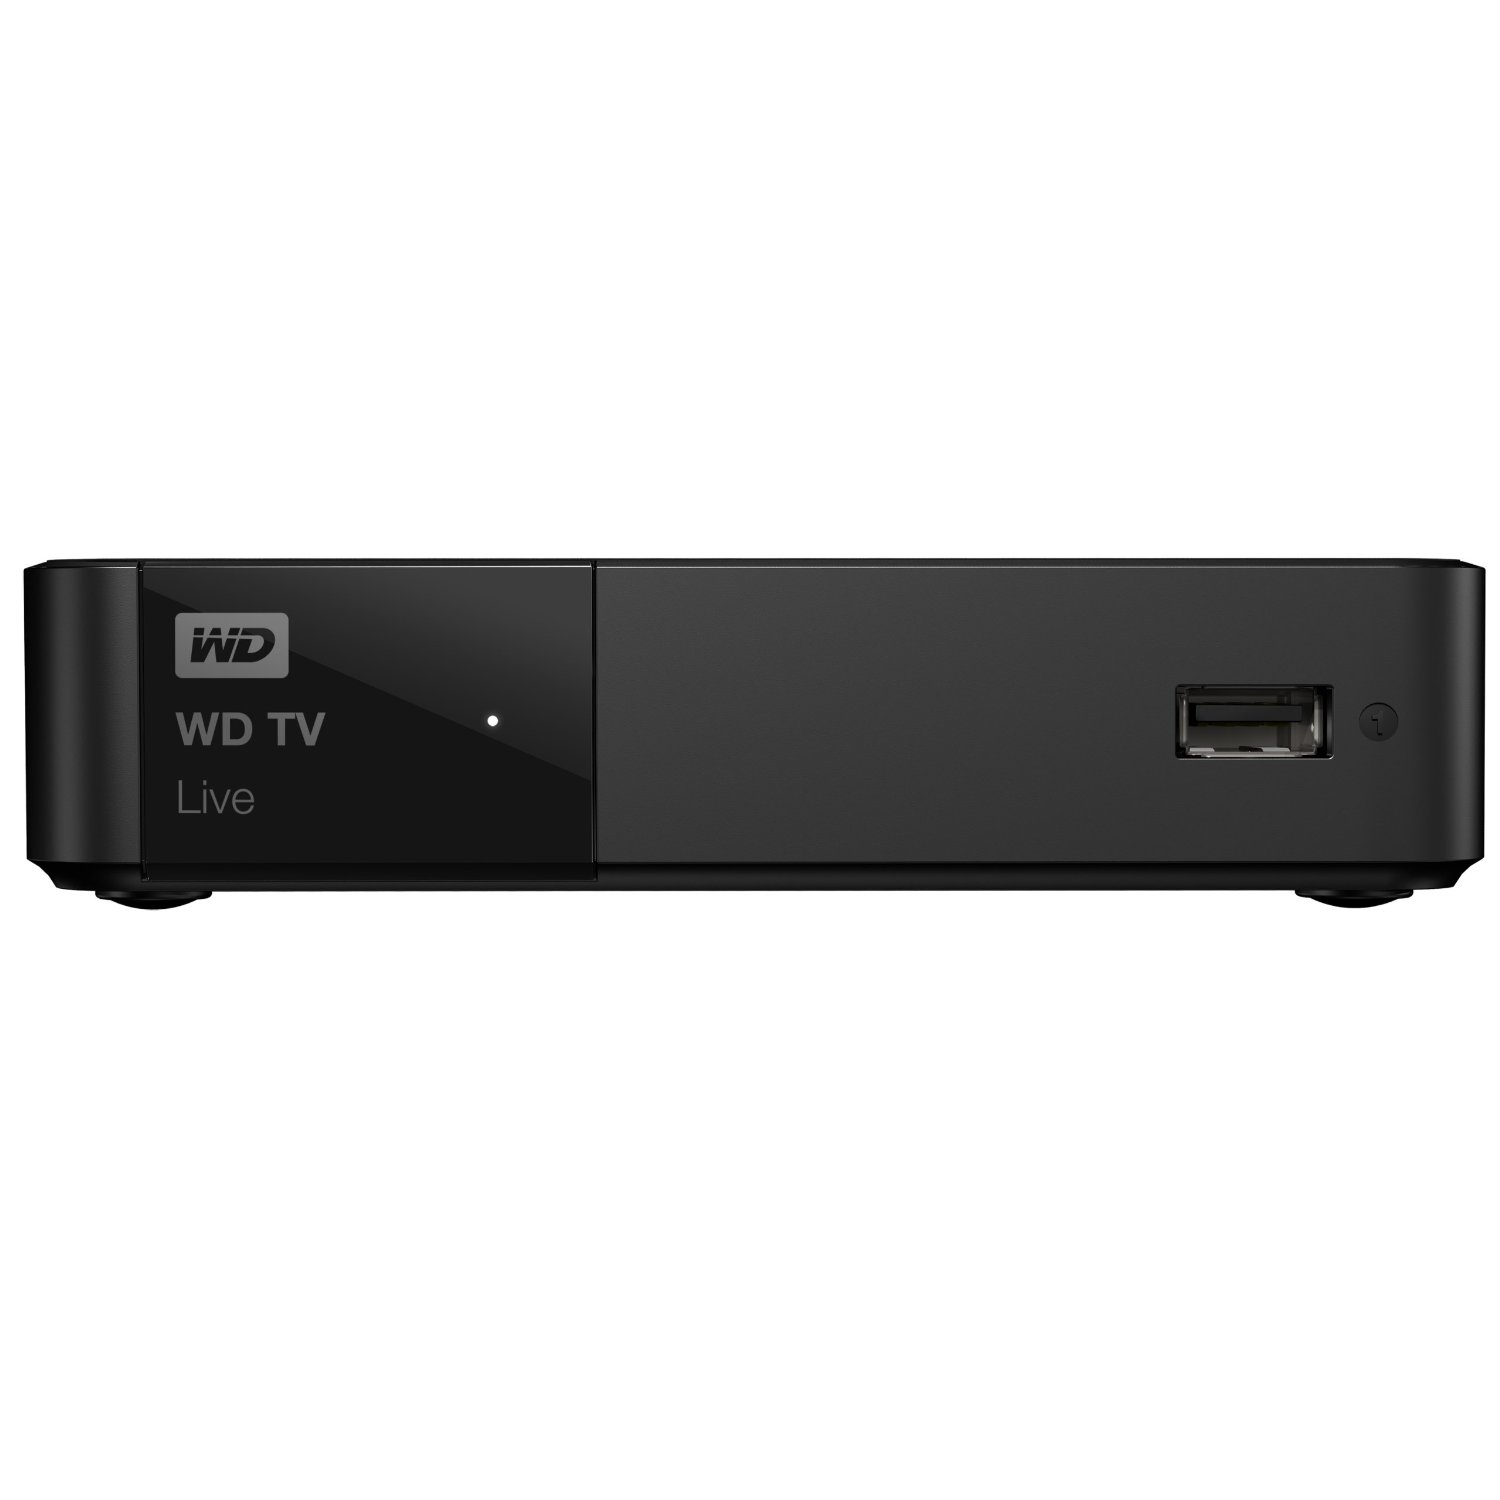 http://thetechjournal.com/wp-content/uploads/images/1110/1318016928-western-digital-wd-tv-live-streaming-media-player-6.jpg